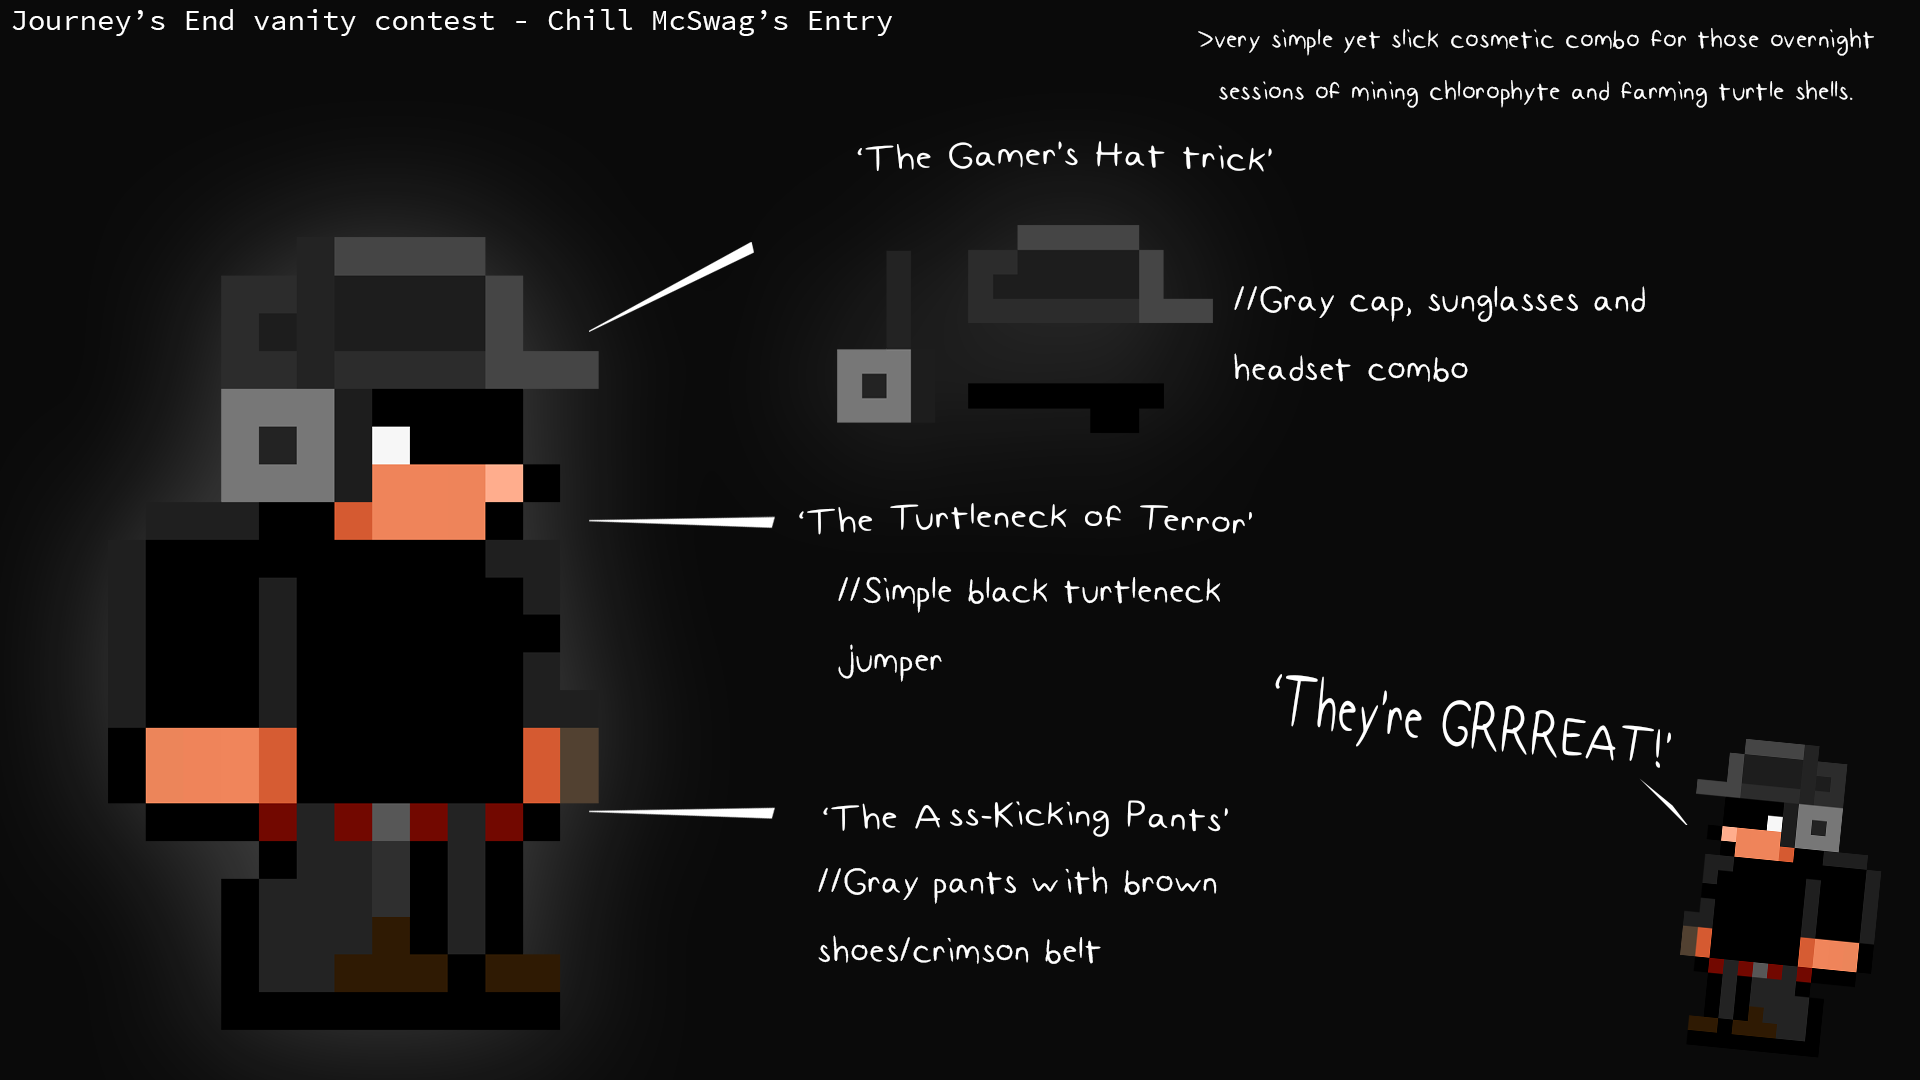 terraria_journeys_end_vanity_contest_entry_chill_mcswag.png